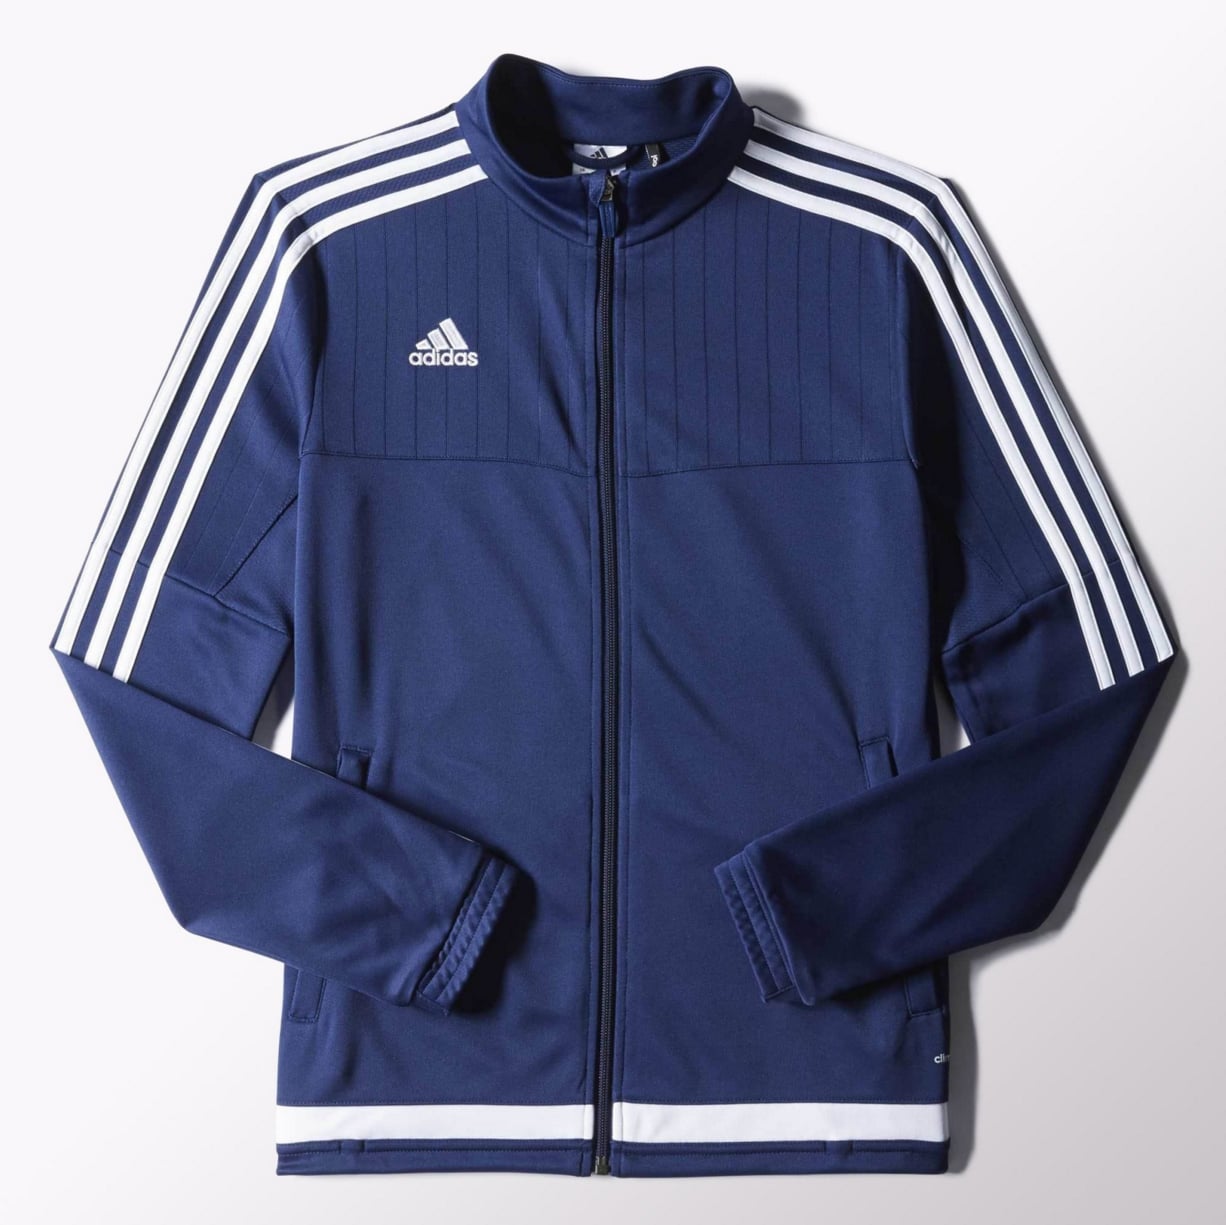 what colour is the adidas jacket